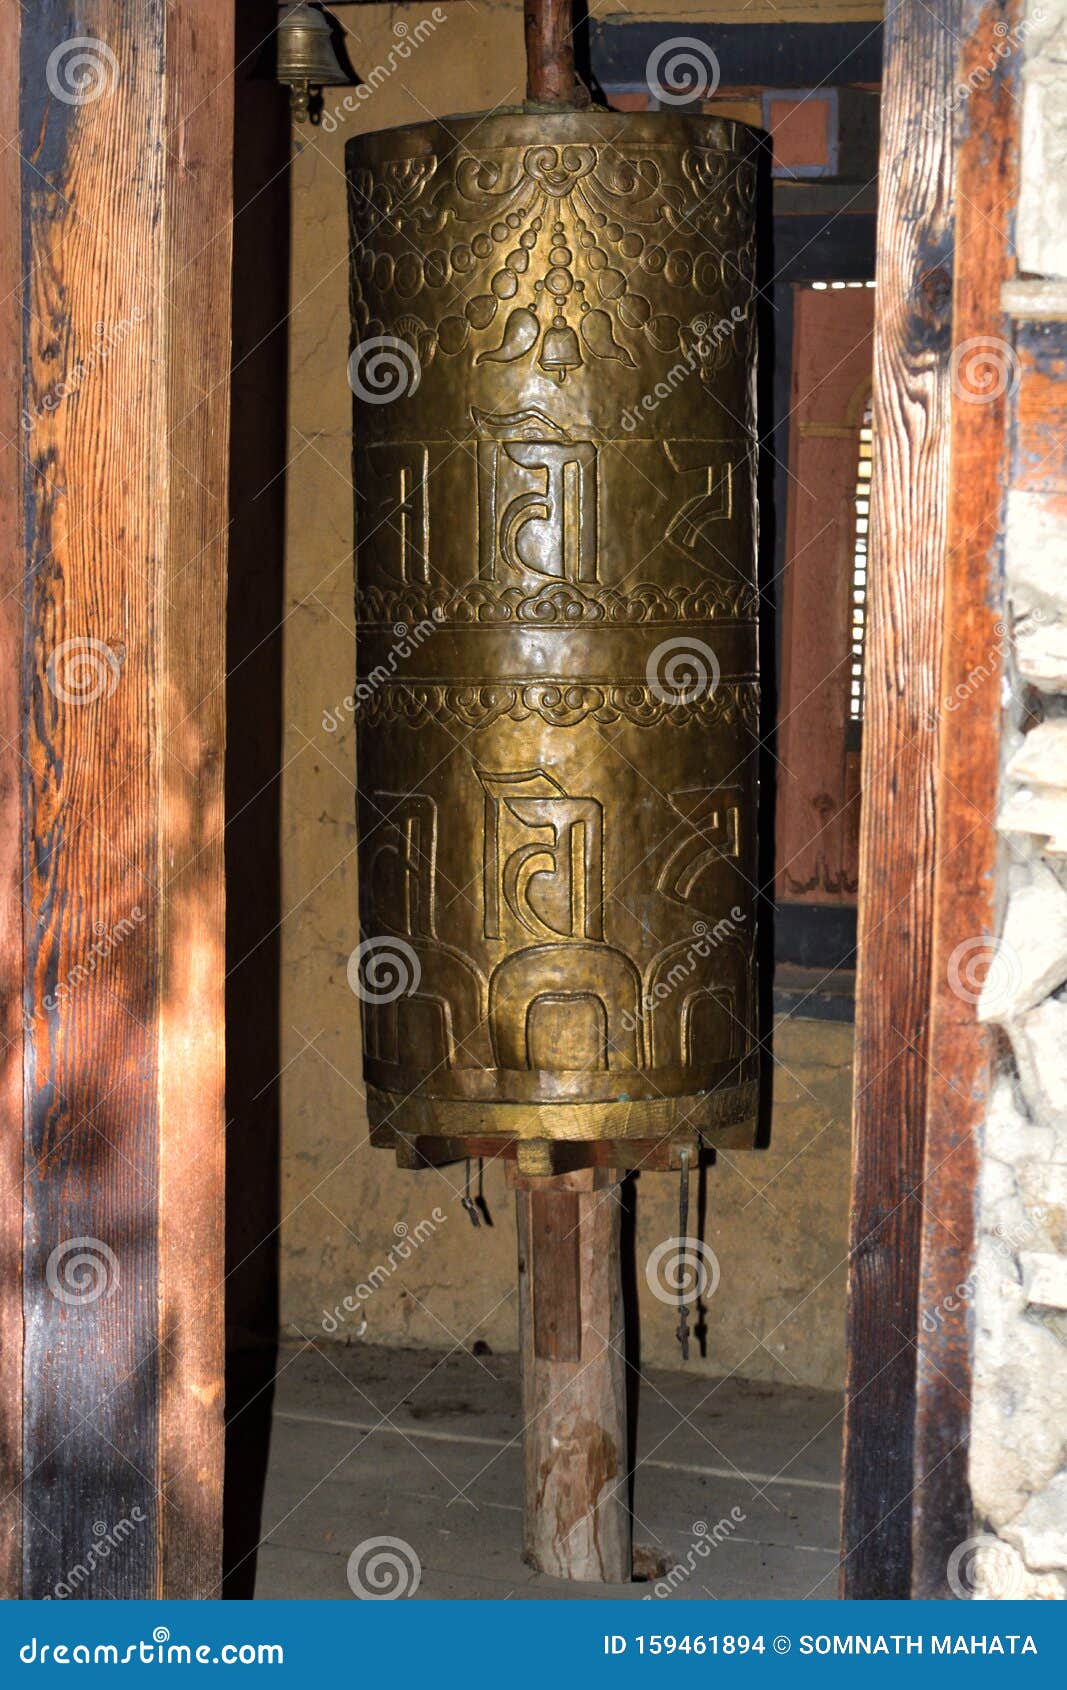 buddhist prayer wheel close-up in a temple